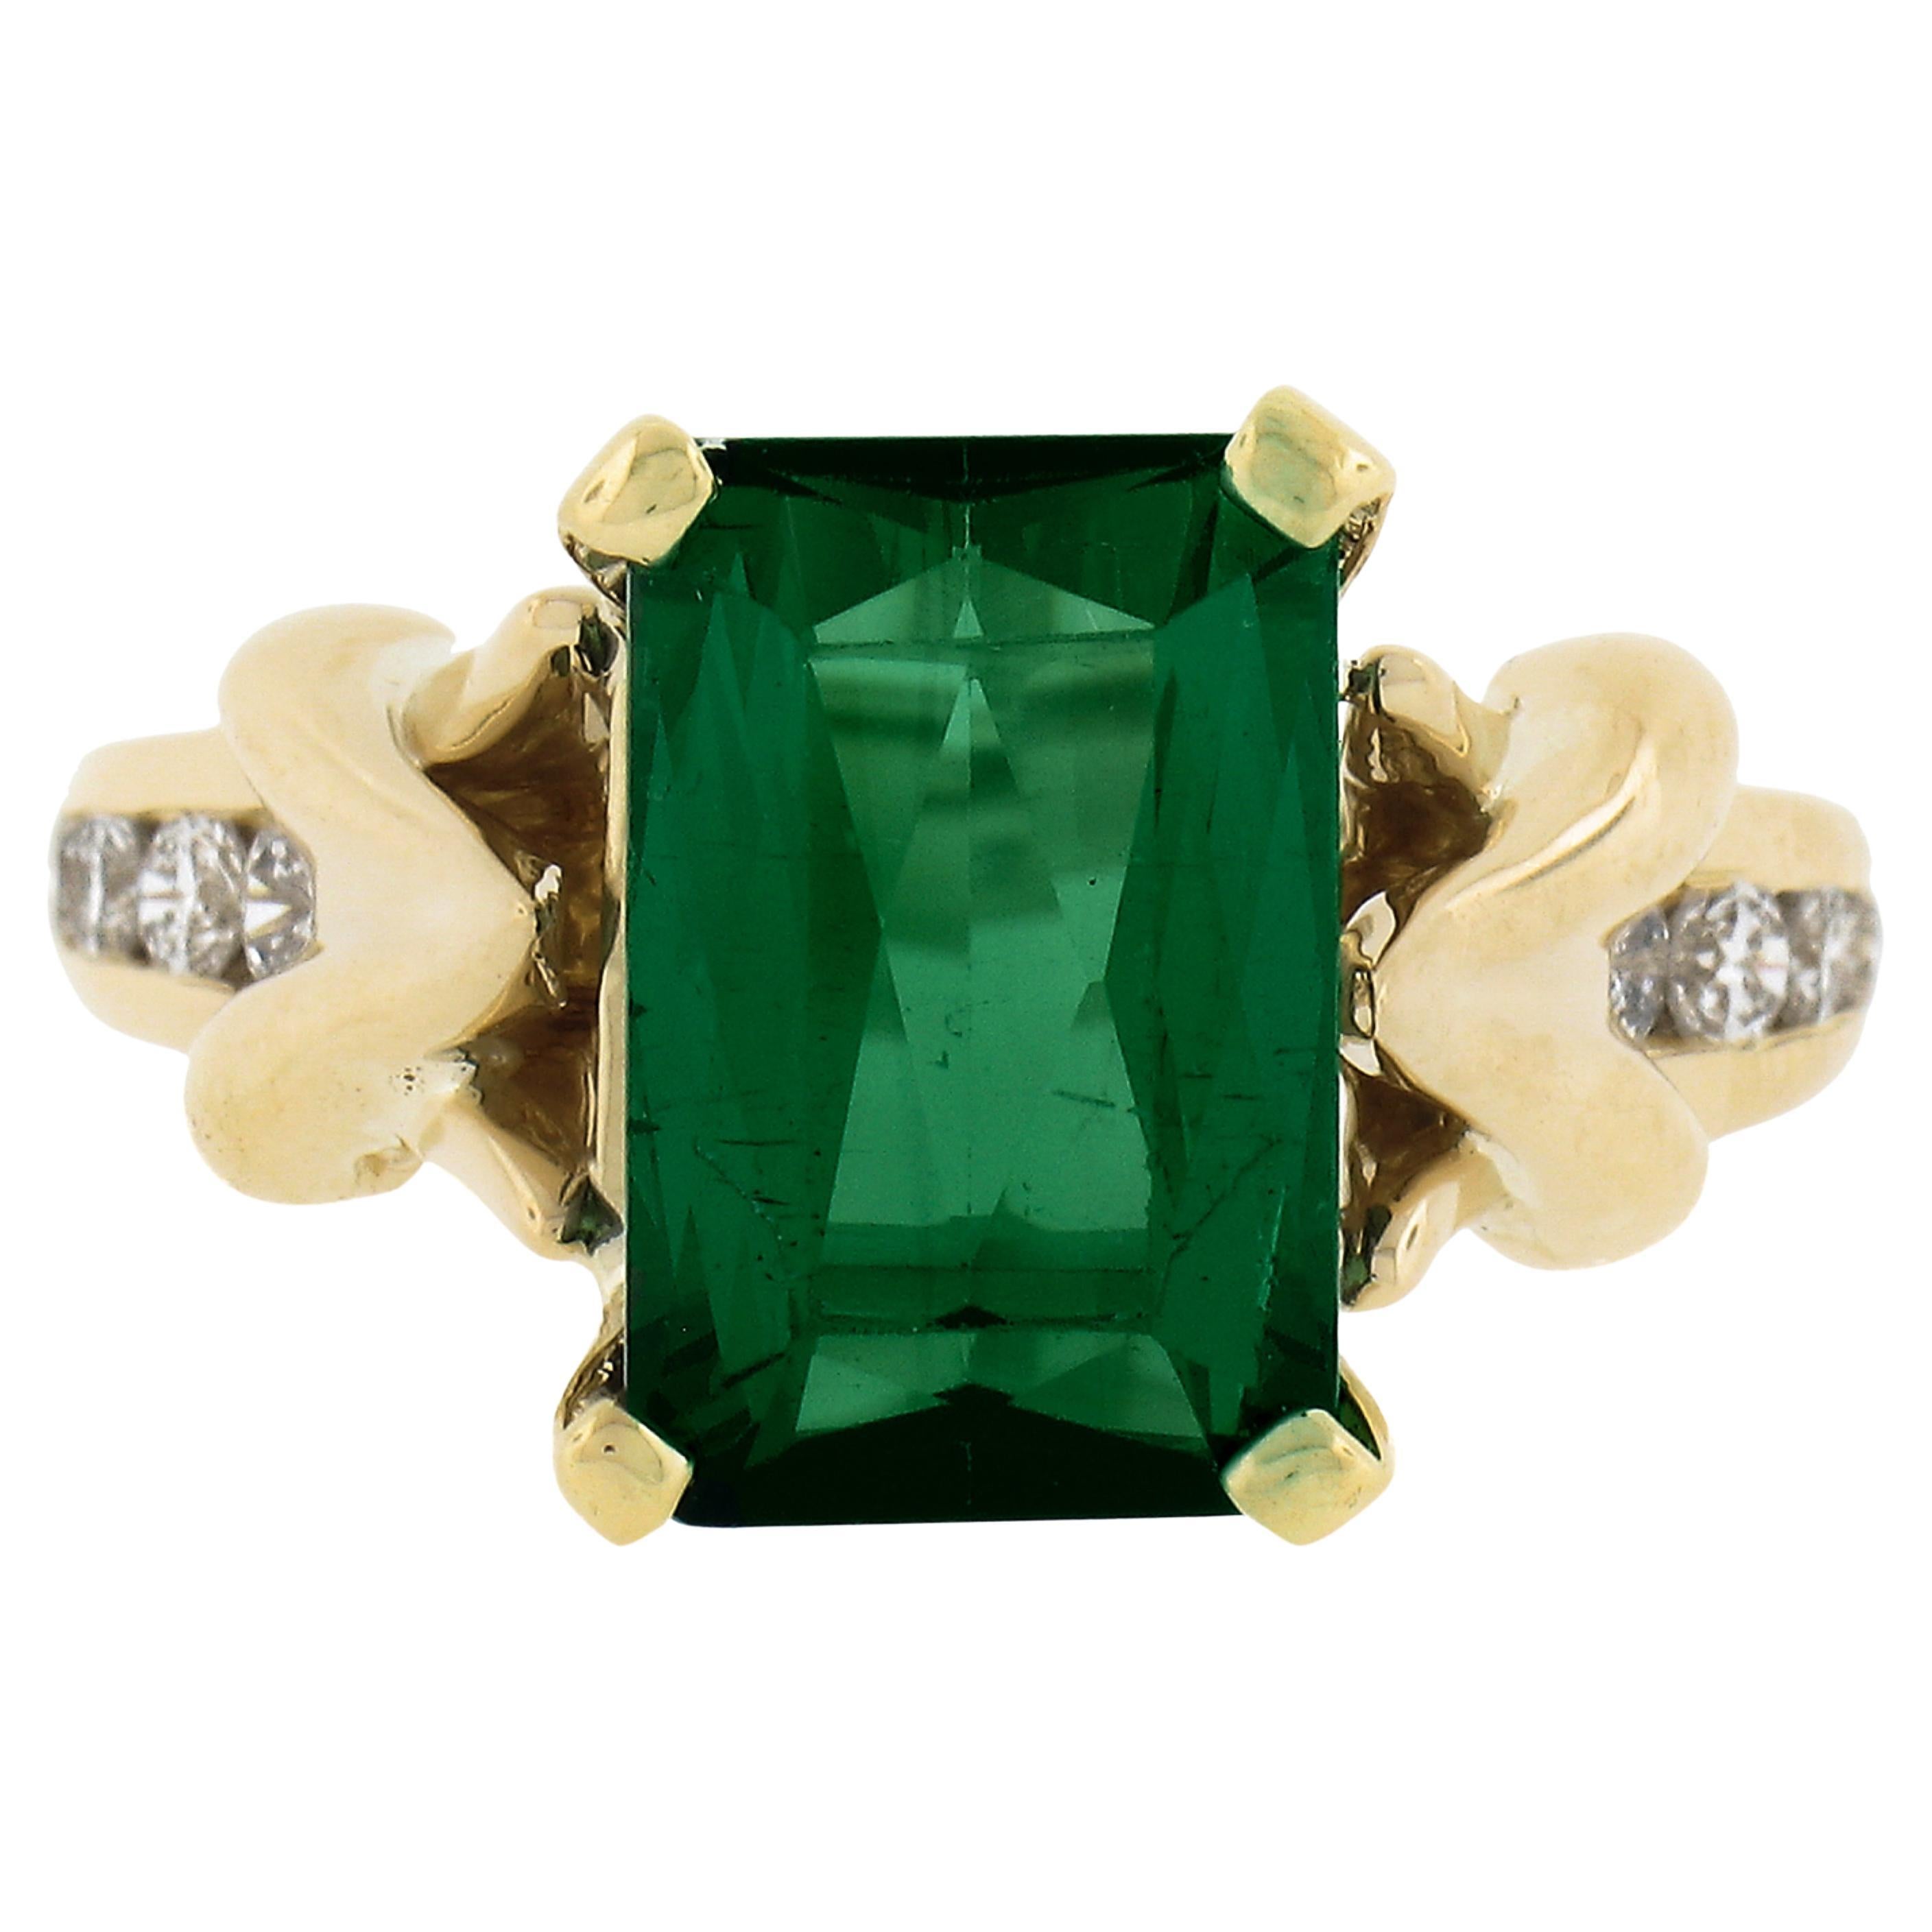 18K Yellow Gold 3.70ctw Green Tourmaline w/ Diamond Solitaire Cocktail Ring